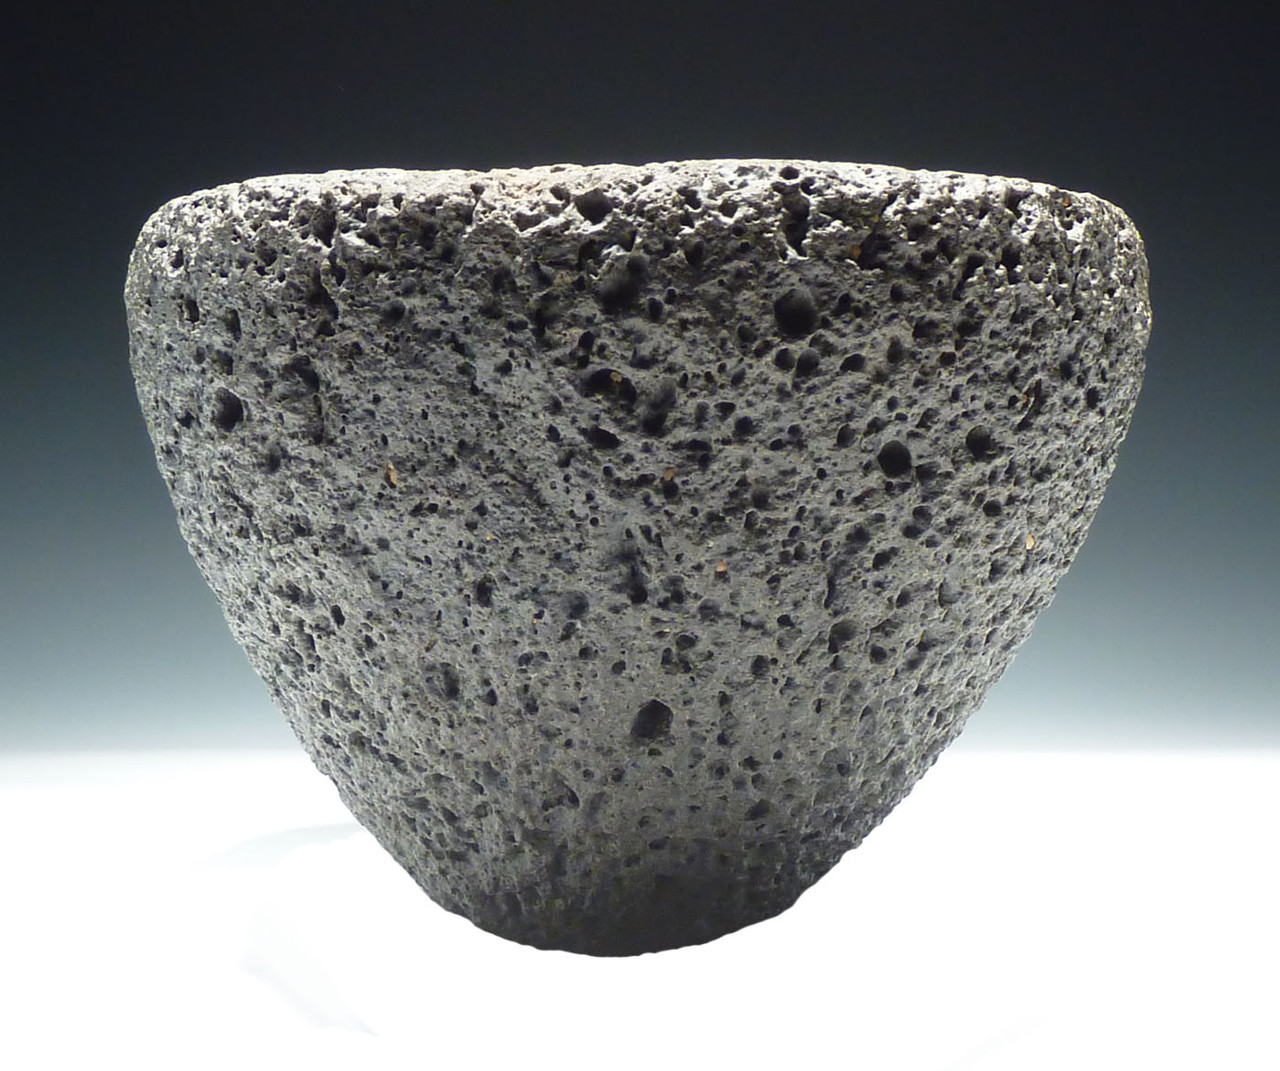 EXTREMELY RARE TENEREAN NEOLITHIC STONE VESICULAR BASALT GRINDING MILL FROM THE TENERIANS OF THE "GREEN SAHARA" *CAP1340X